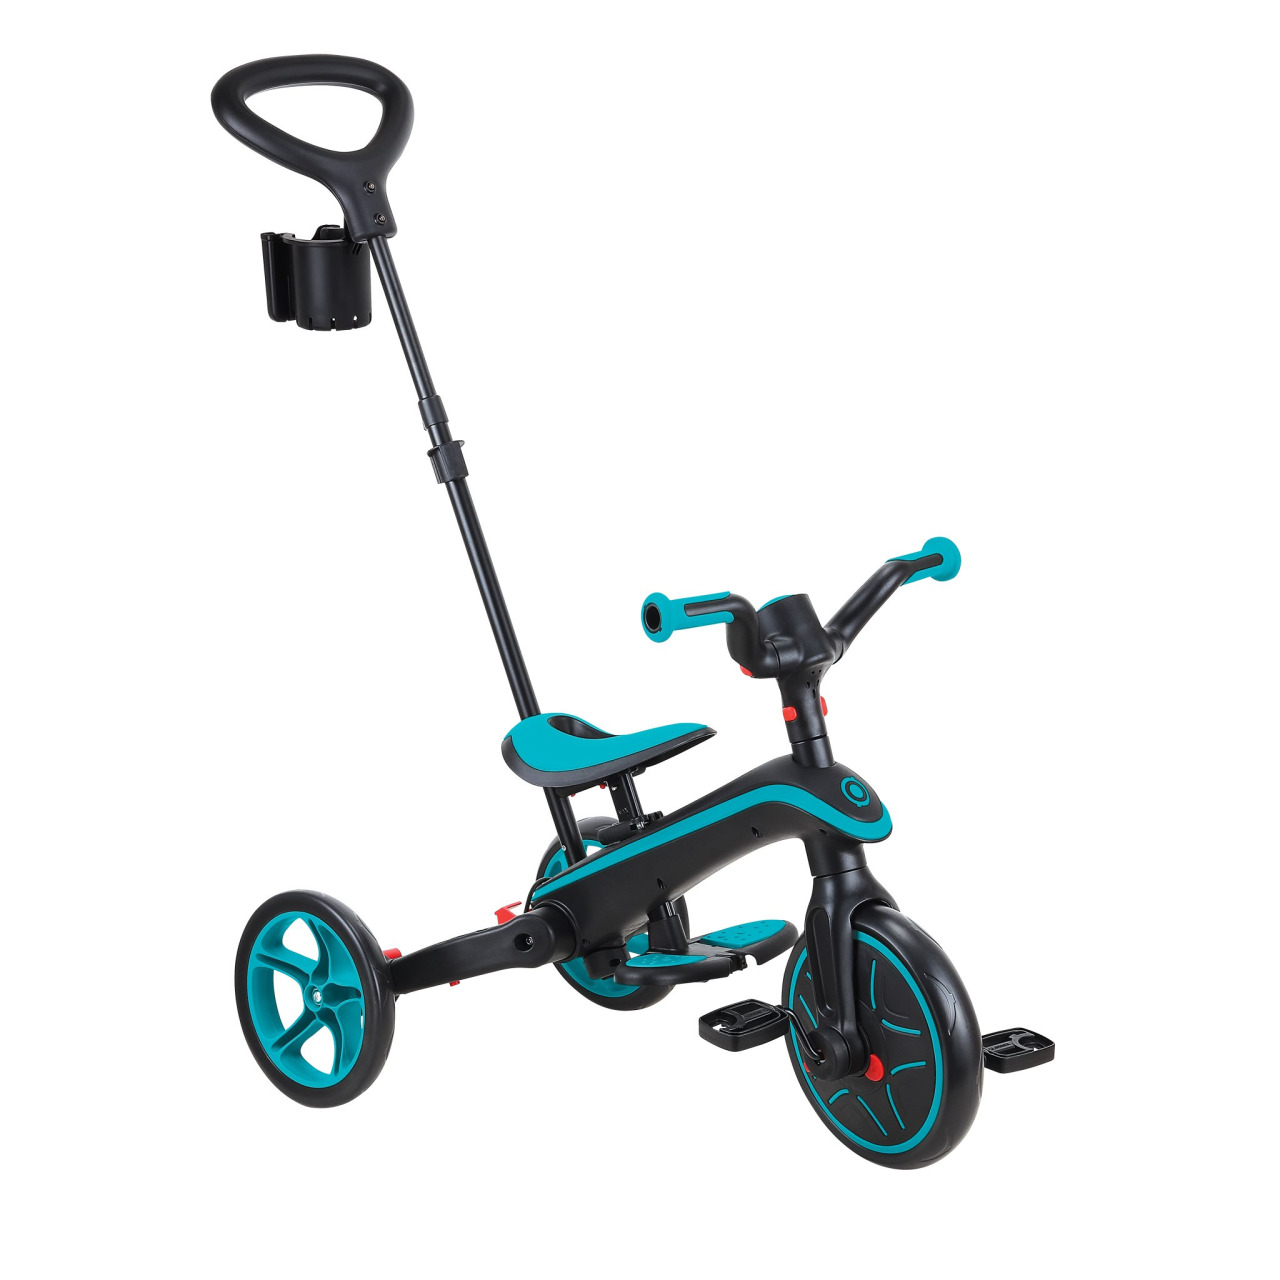 732 105 Foldable Tricycle With Push Handle